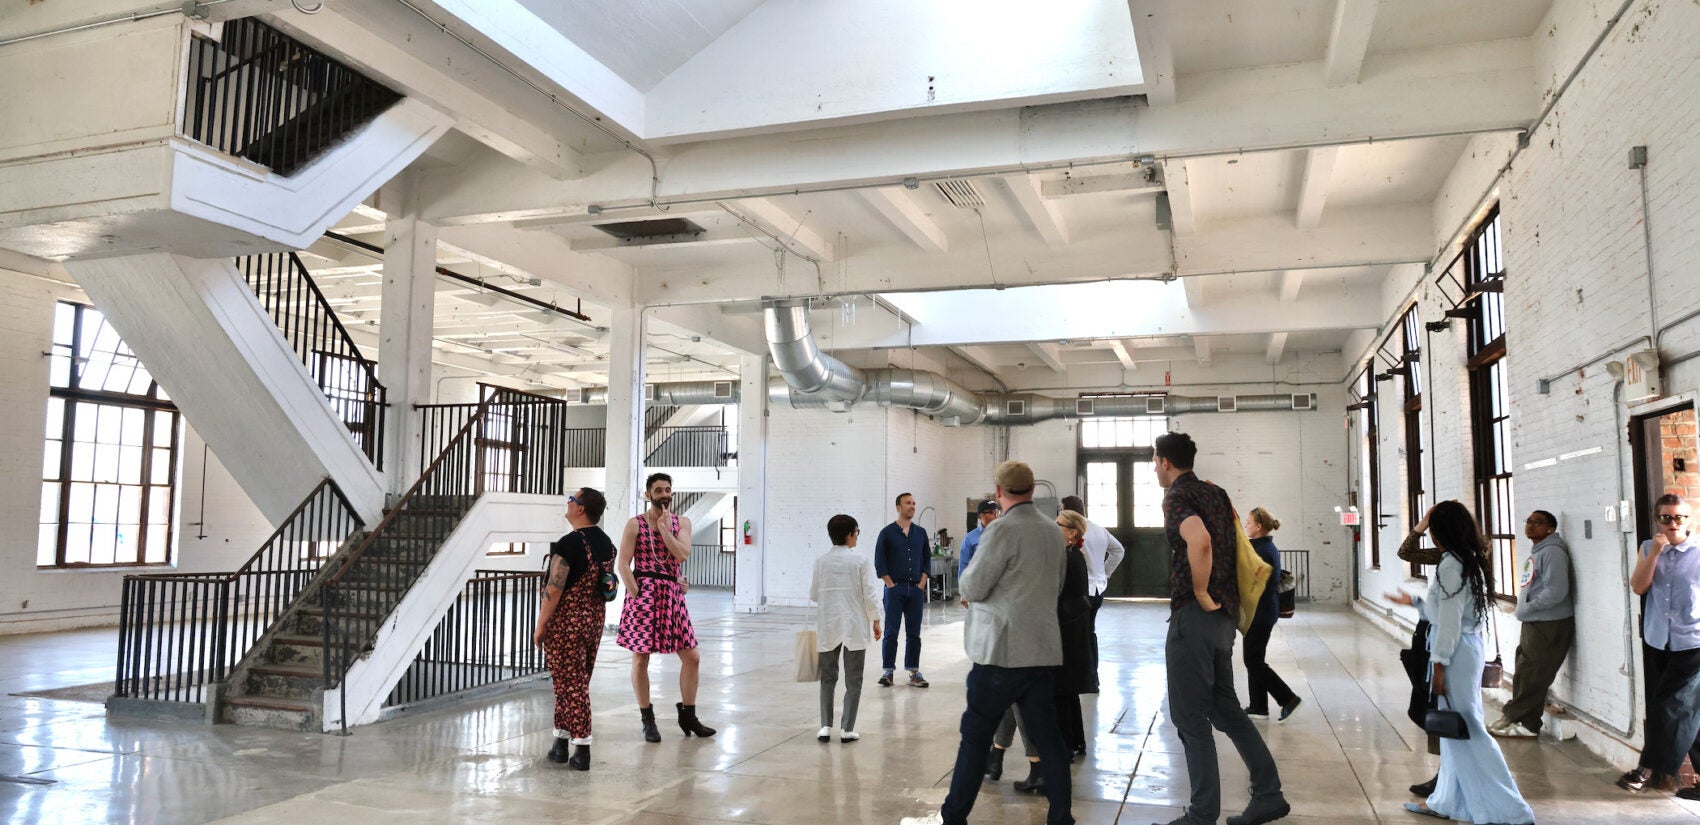 Guests file into the open space that was once the Philadelphia Electric Company Susquehanna substation